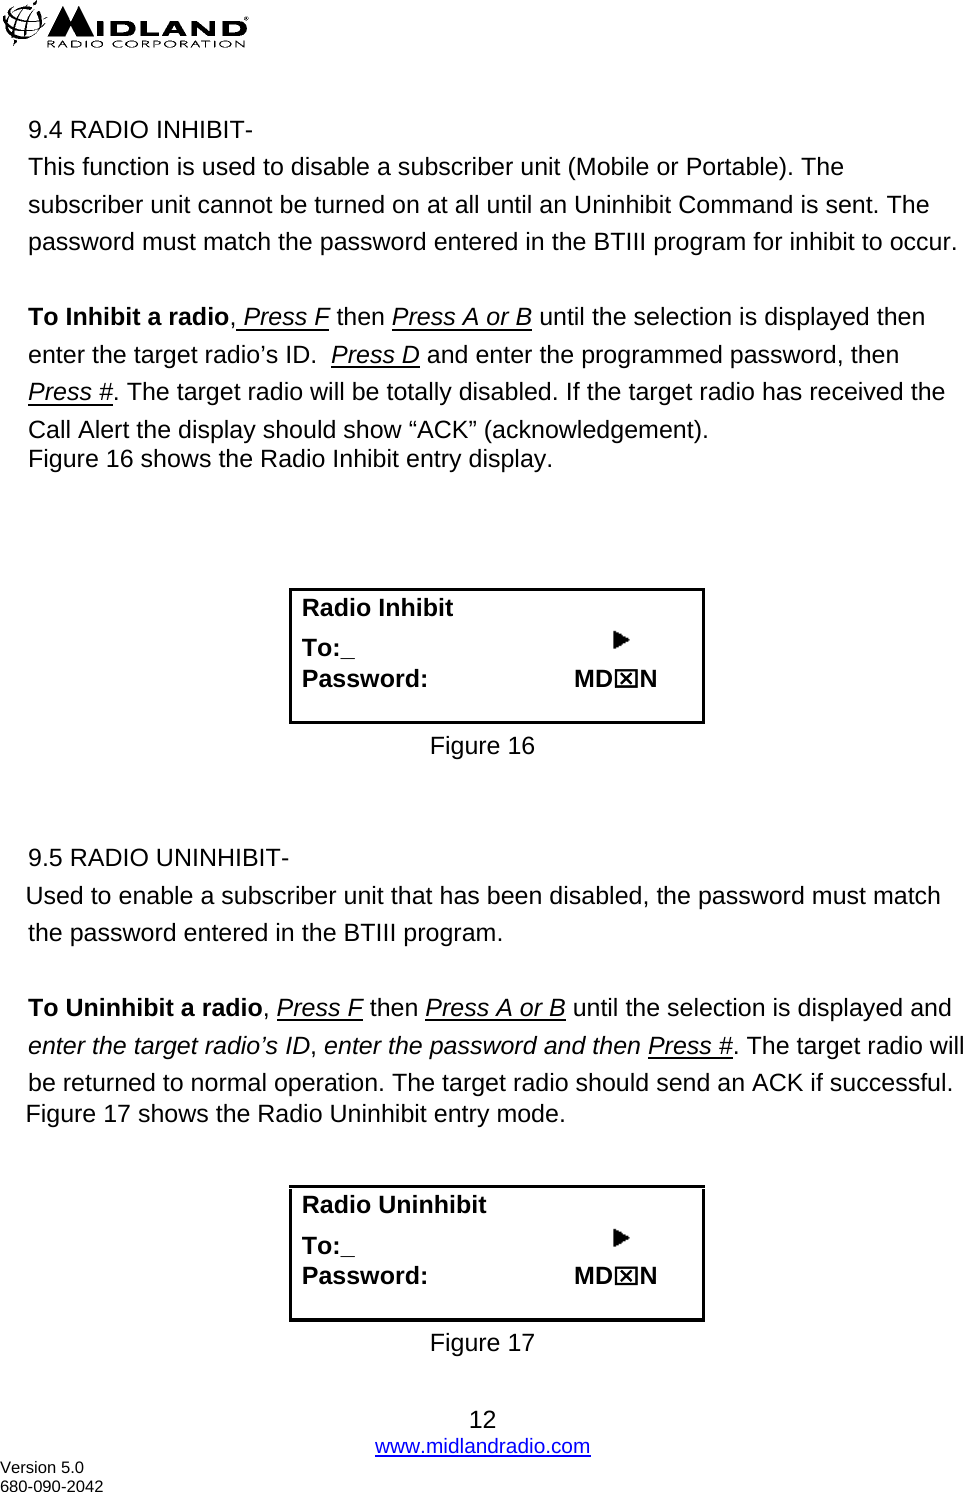   9.4 RADIO INHIBIT- This function is used to disable a subscriber unit (Mobile or Portable). The subscriber unit cannot be turned on at all until an Uninhibit Command is sent. The password must match the password entered in the BTIII program for inhibit to occur.  To Inhibit a radio, Press F then Press A or B until the selection is displayed then enter the target radio’s ID.  Press D and enter the programmed password, then Press #. The target radio will be totally disabled. If the target radio has received the Call Alert the display should show “ACK” (acknowledgement). Figure 16 shows the Radio Inhibit entry display.     Radio Inhibit   To:_                                          Password:                     MD⌧N  Figure 16   9.5 RADIO UNINHIBIT-      Used to enable a subscriber unit that has been disabled, the password must match     the password entered in the BTIII program.  To Uninhibit a radio, Press F then Press A or B until the selection is displayed and enter the target radio’s ID, enter the password and then Press #. The target radio will be returned to normal operation. The target radio should send an ACK if successful.      Figure 17 shows the Radio Uninhibit entry mode.   Radio Uninhibit   To:_                                          Password:                     MD⌧N  Figure 17  12 www.midlandradio.com Version 5.0 680-090-2042 